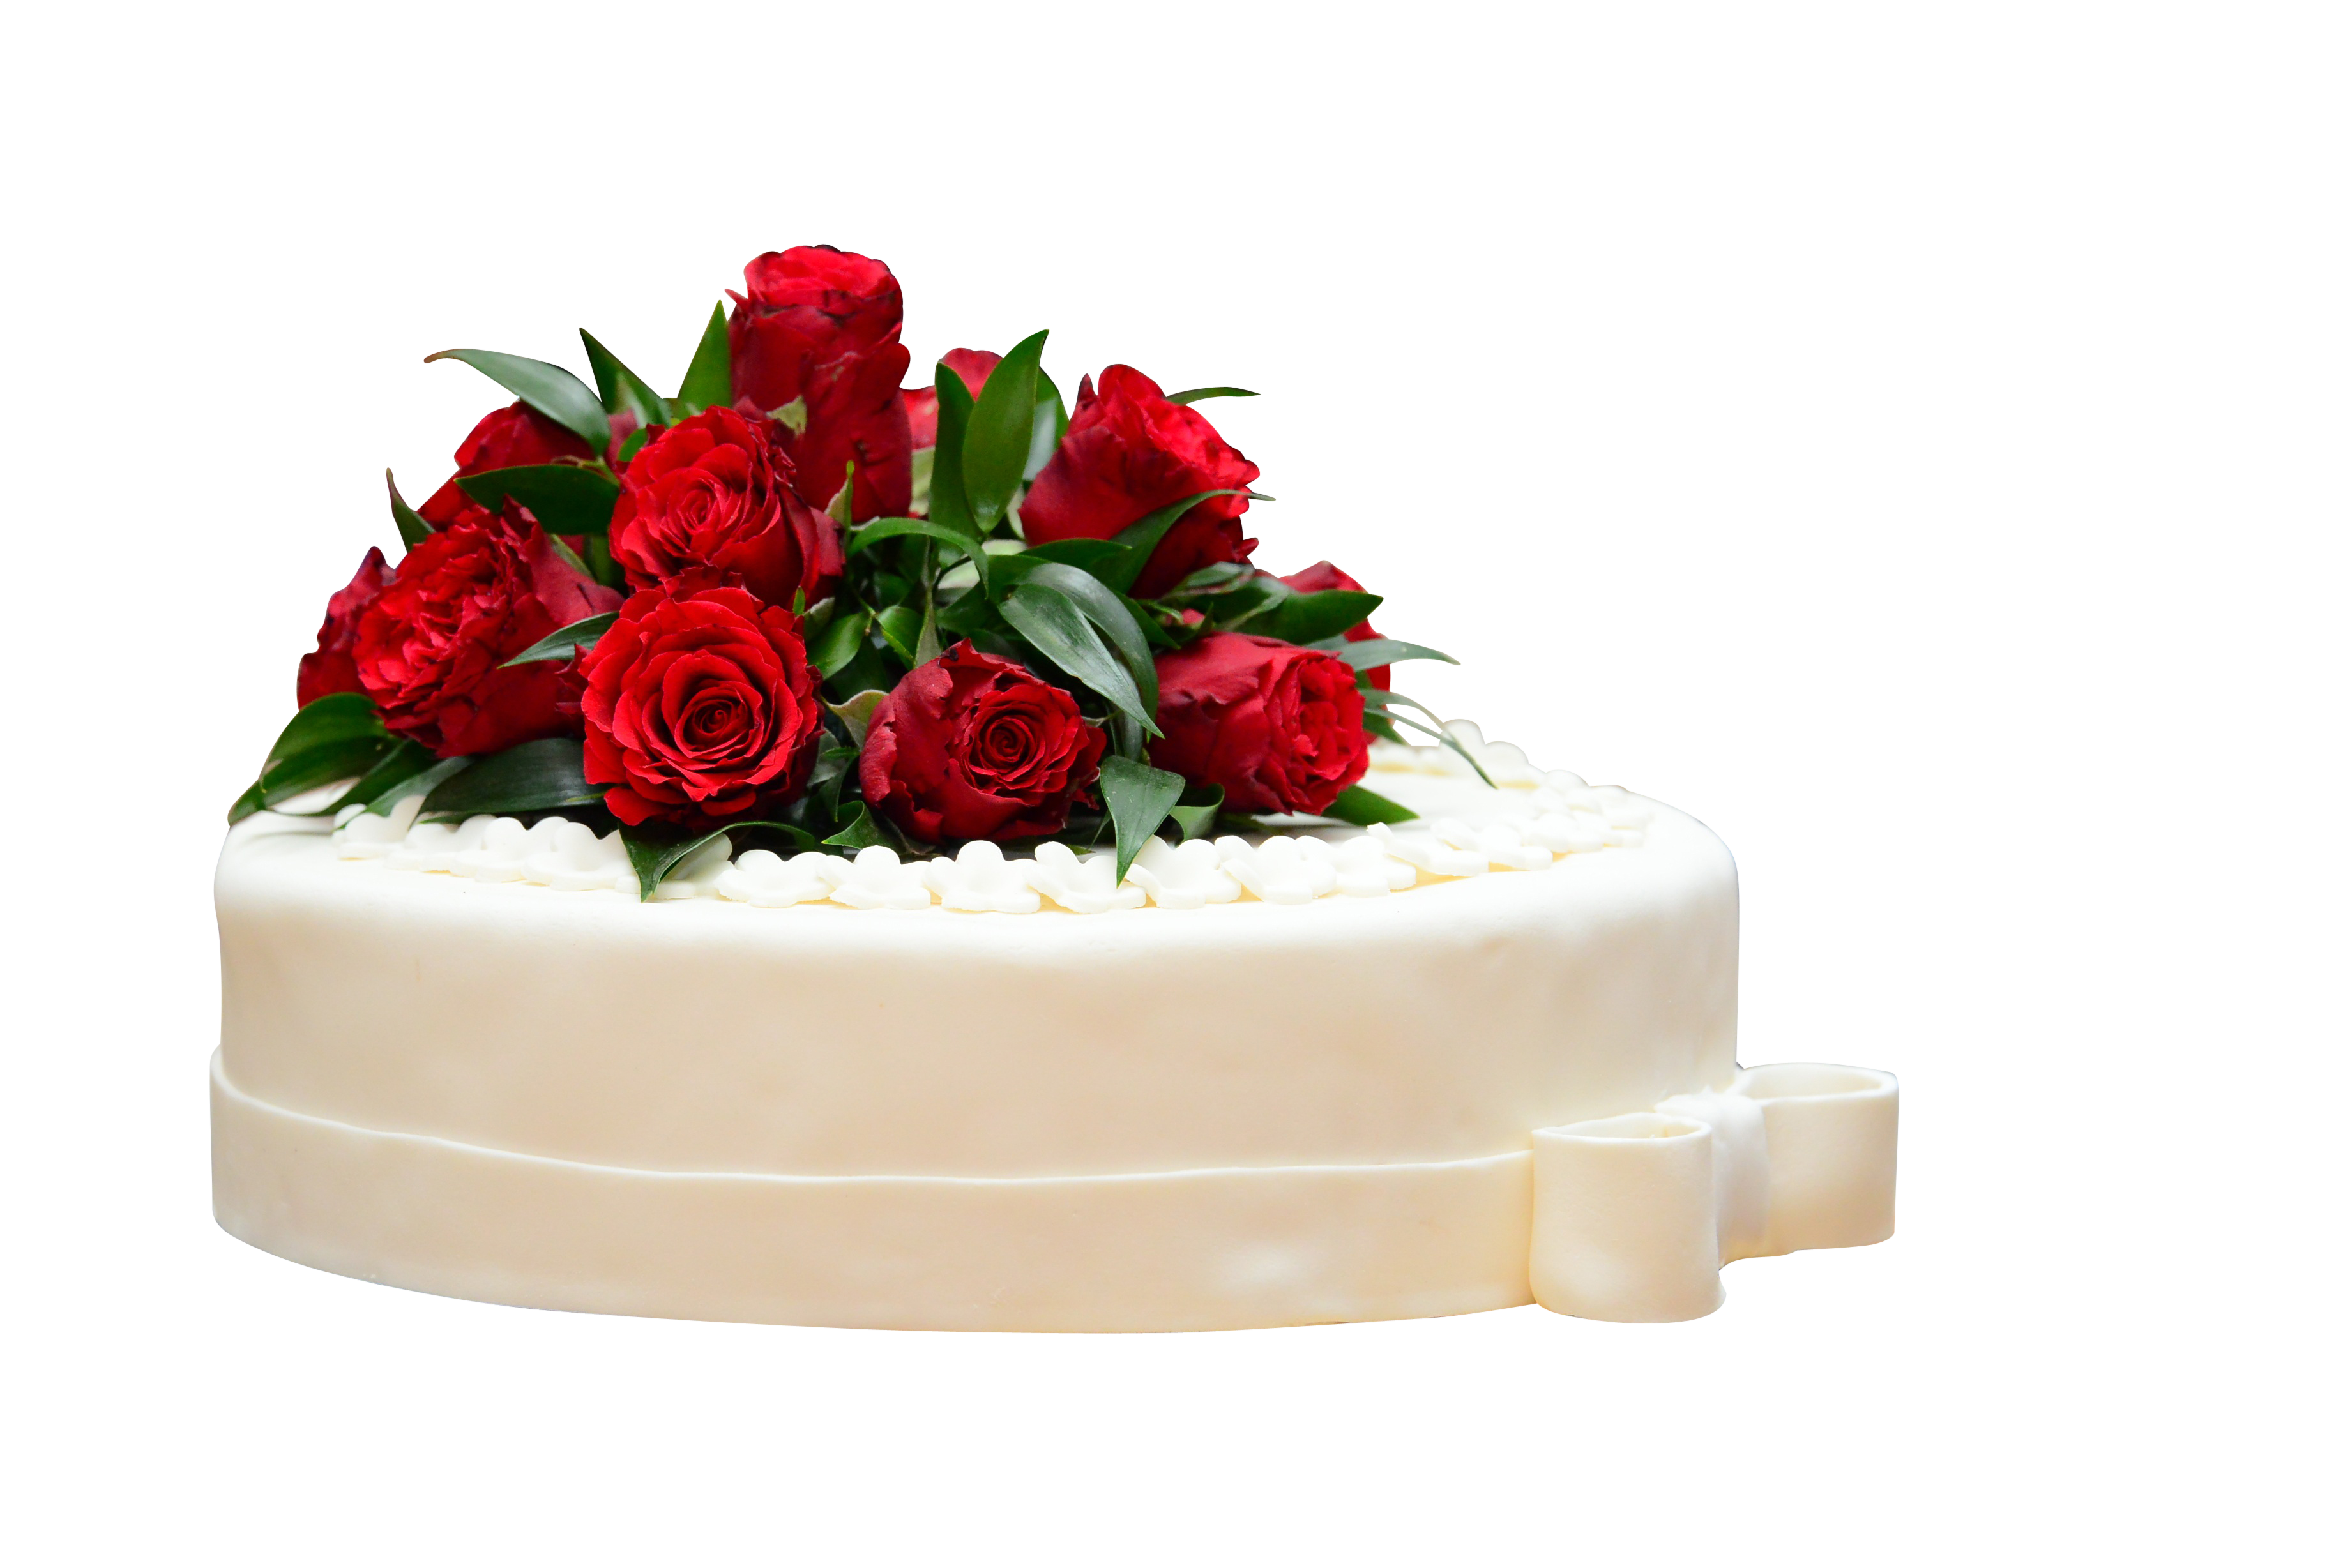 A Cake With Red Roses On Top